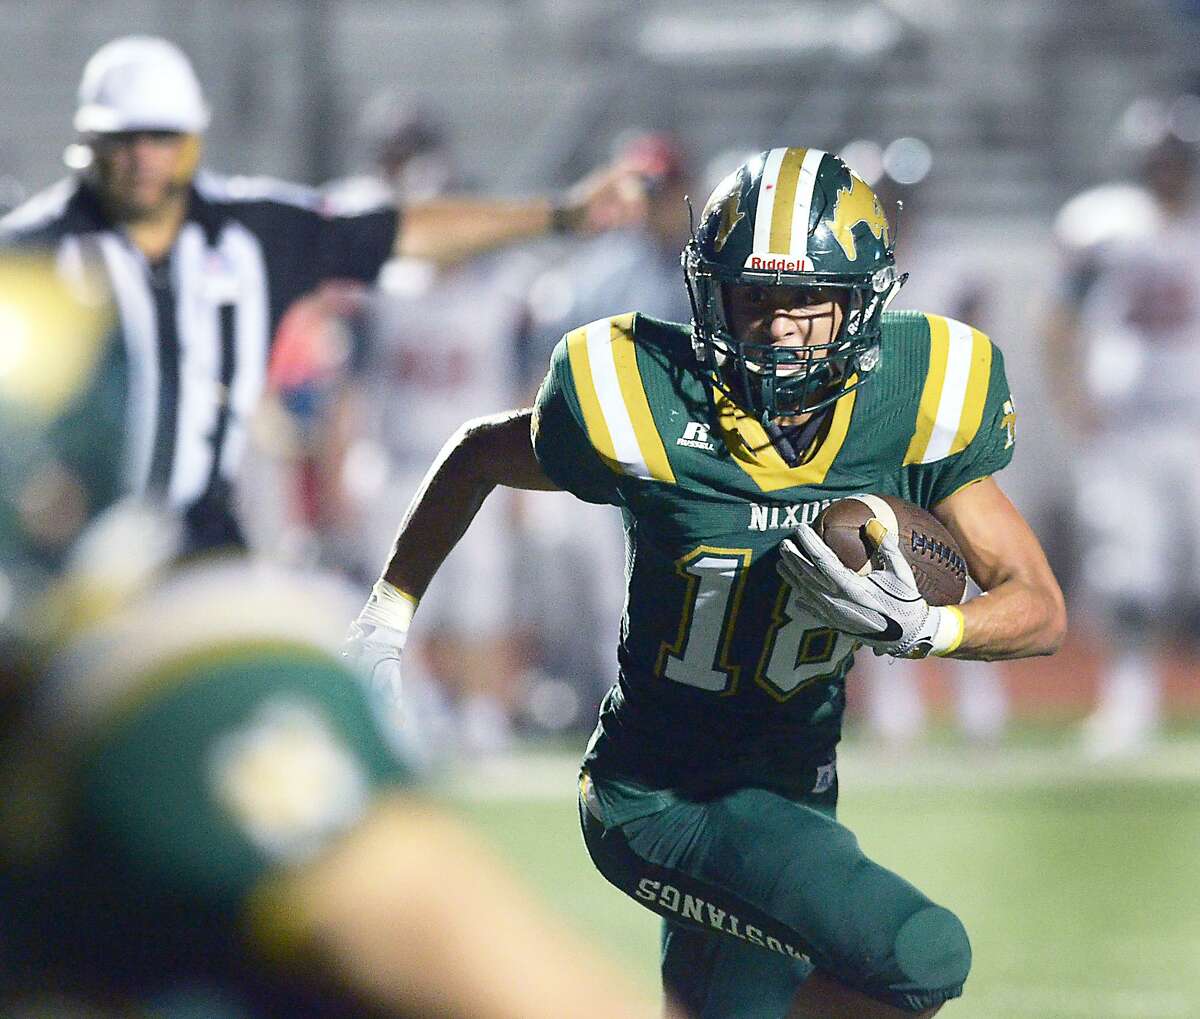 Nixon running back Emil Olivia and the Mustangs dominated Sharyland 49-14 on Friday night.